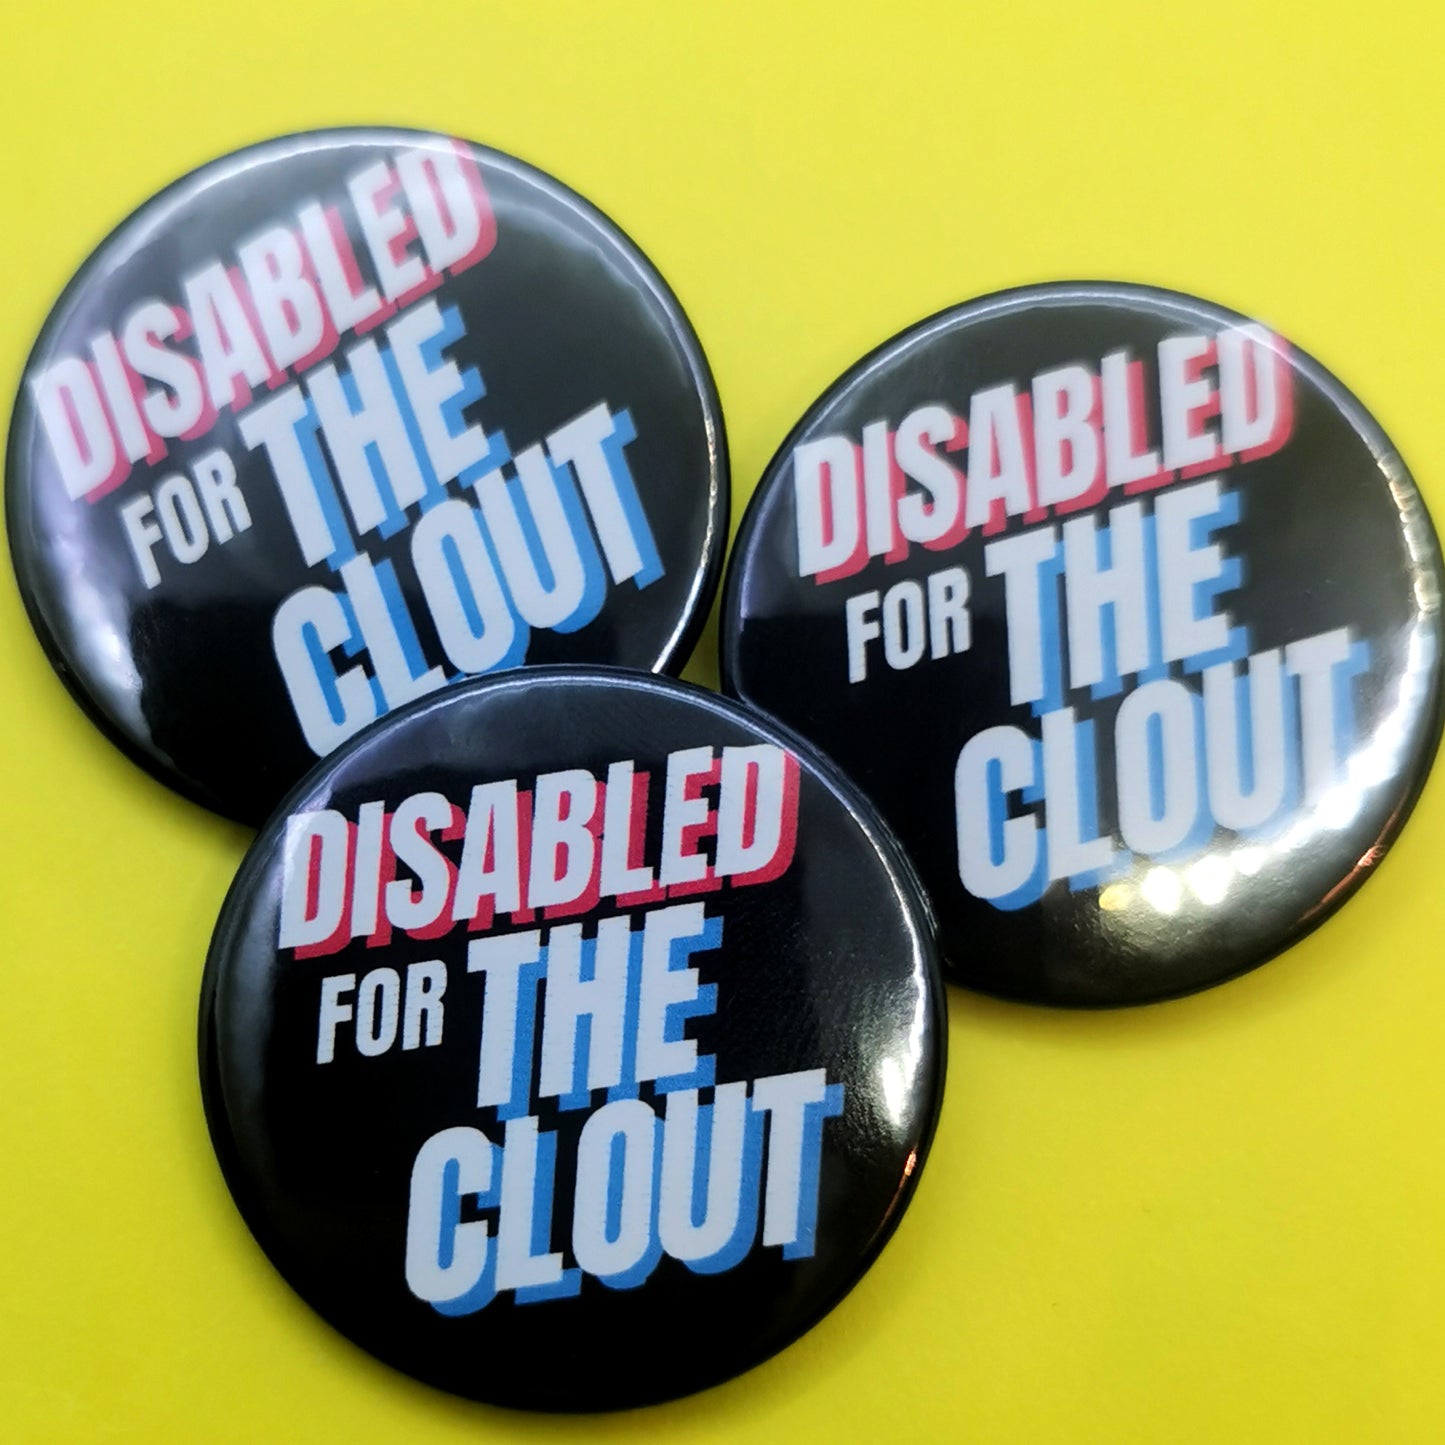 Disabled / Chronically Ill for The Clout badge